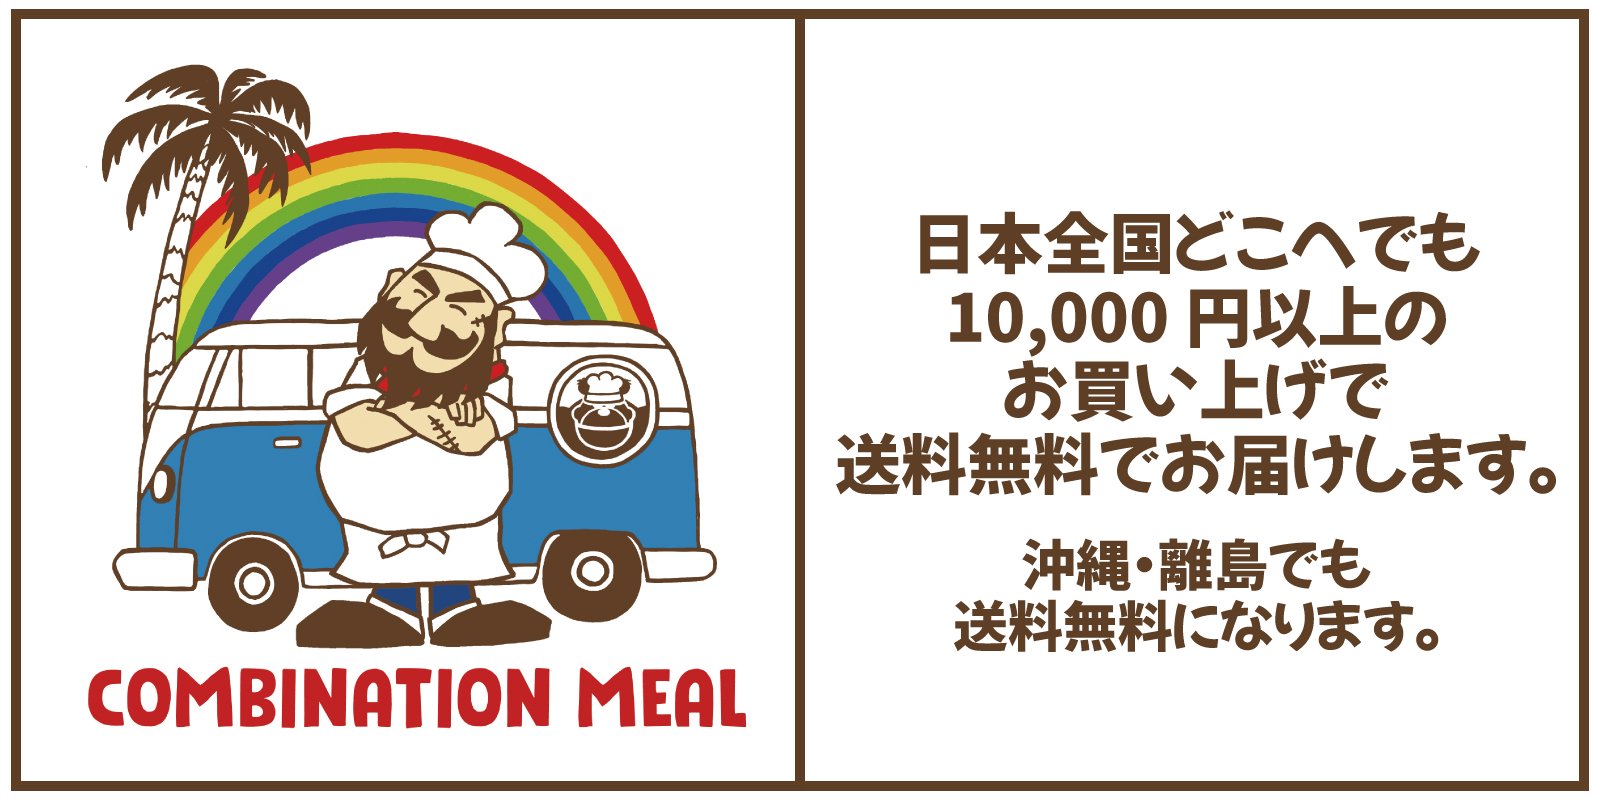 COMBINATION MEAL / コンビネーションミール